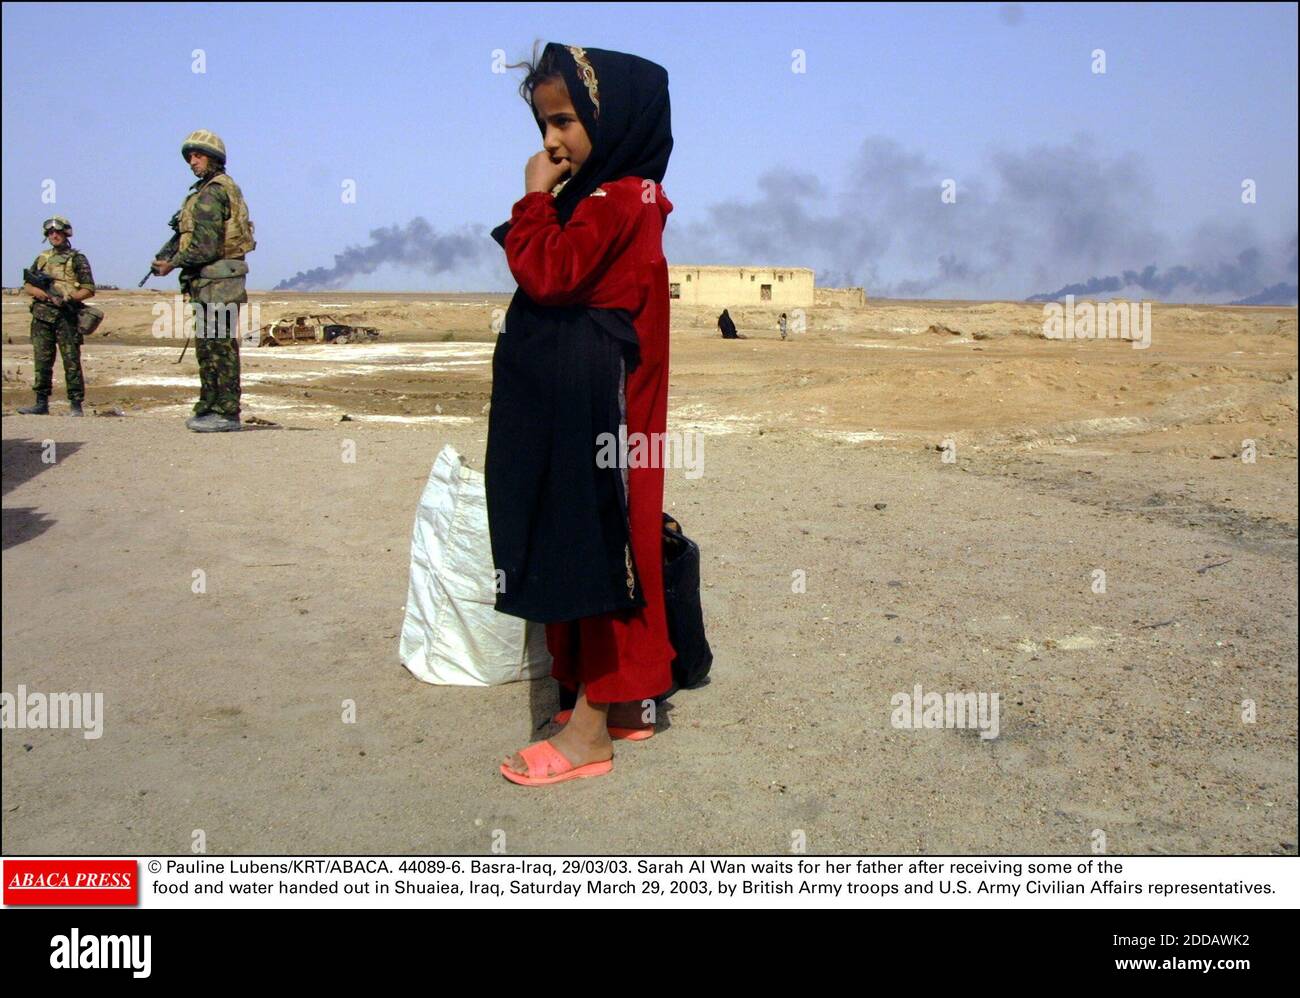 NO FILM, NO VIDEO, NO TV, NO DOCUMENTARY - © Pauline Lubens/KRT/ABACA. 44089-6. Basra-Iraq, 29/03/03. Sarah Al Wan waits for her father after receiving some of the food and water handed out in Shuaiea, Iraq, Saturday March 29, 2003, by British Army troops and U.S. Army Civilian Affairs representat Stock Photo